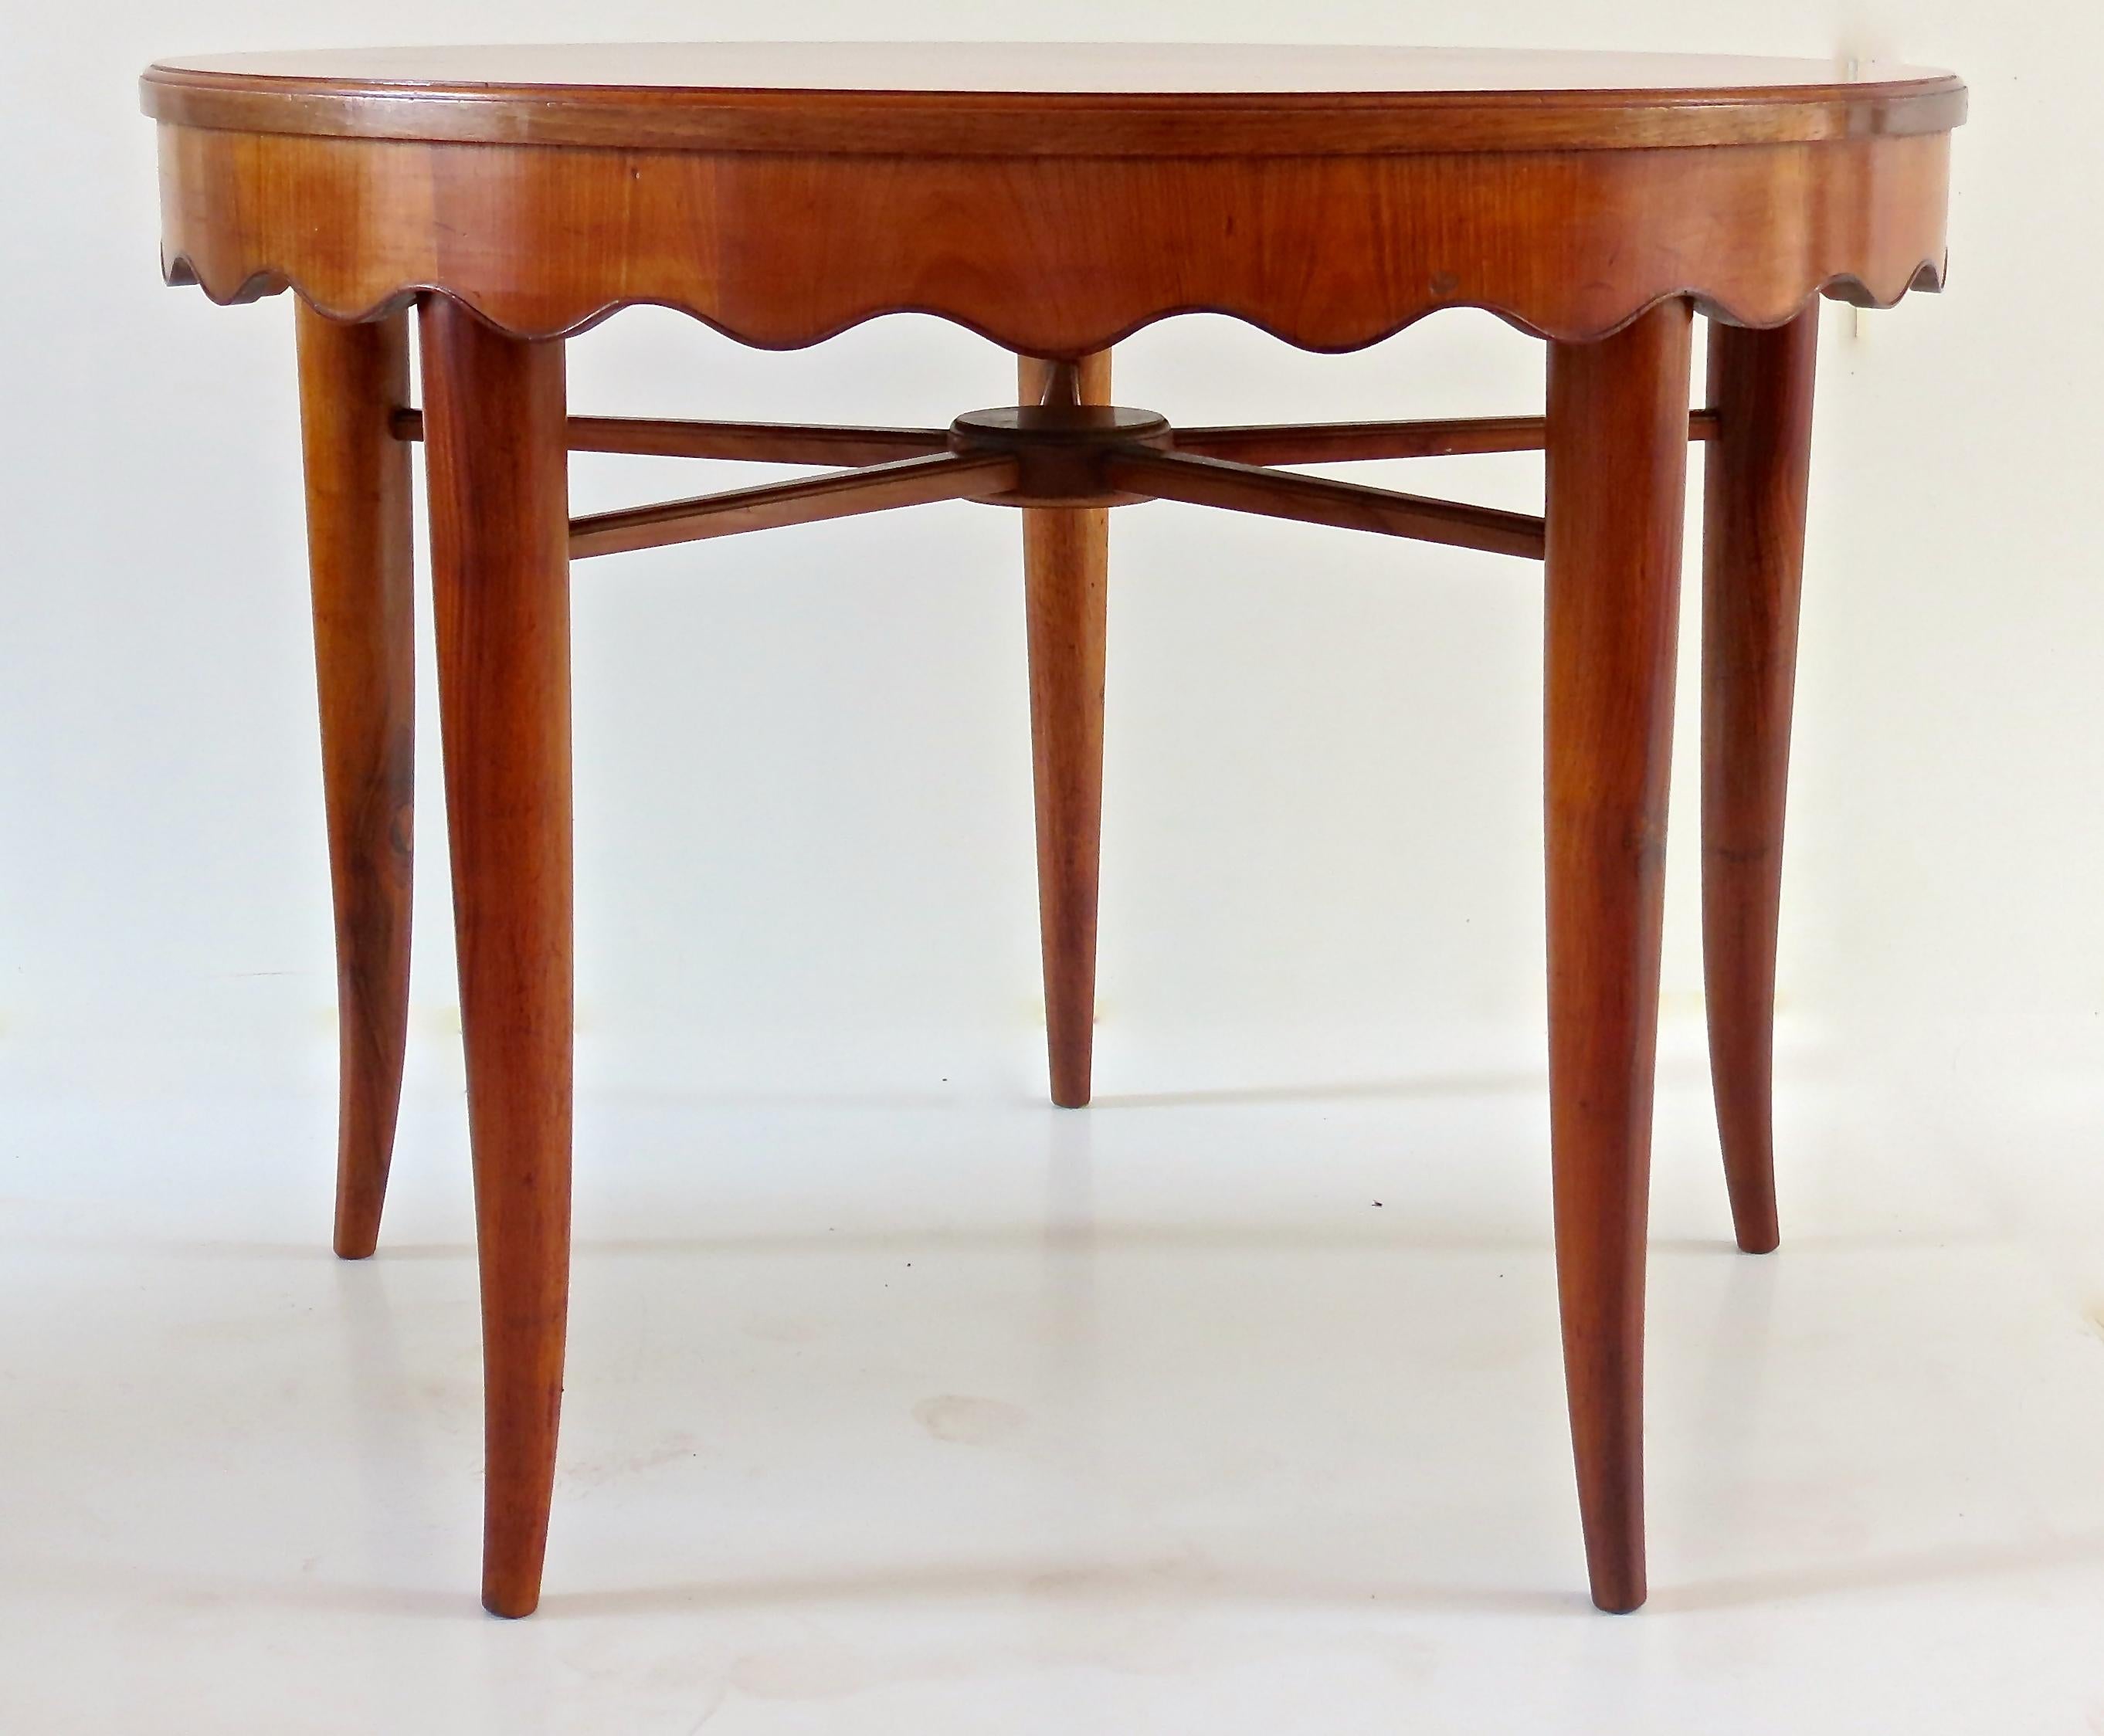 Large rare Paolo Buffa round dining table, cherrywood, circa 1950
five conical saber legs and scalloped edges
executed by Mario Quarti, Cantu
Measures: height 80cm, diameter 106 cm
Good condition, very good original patina.
Together with a